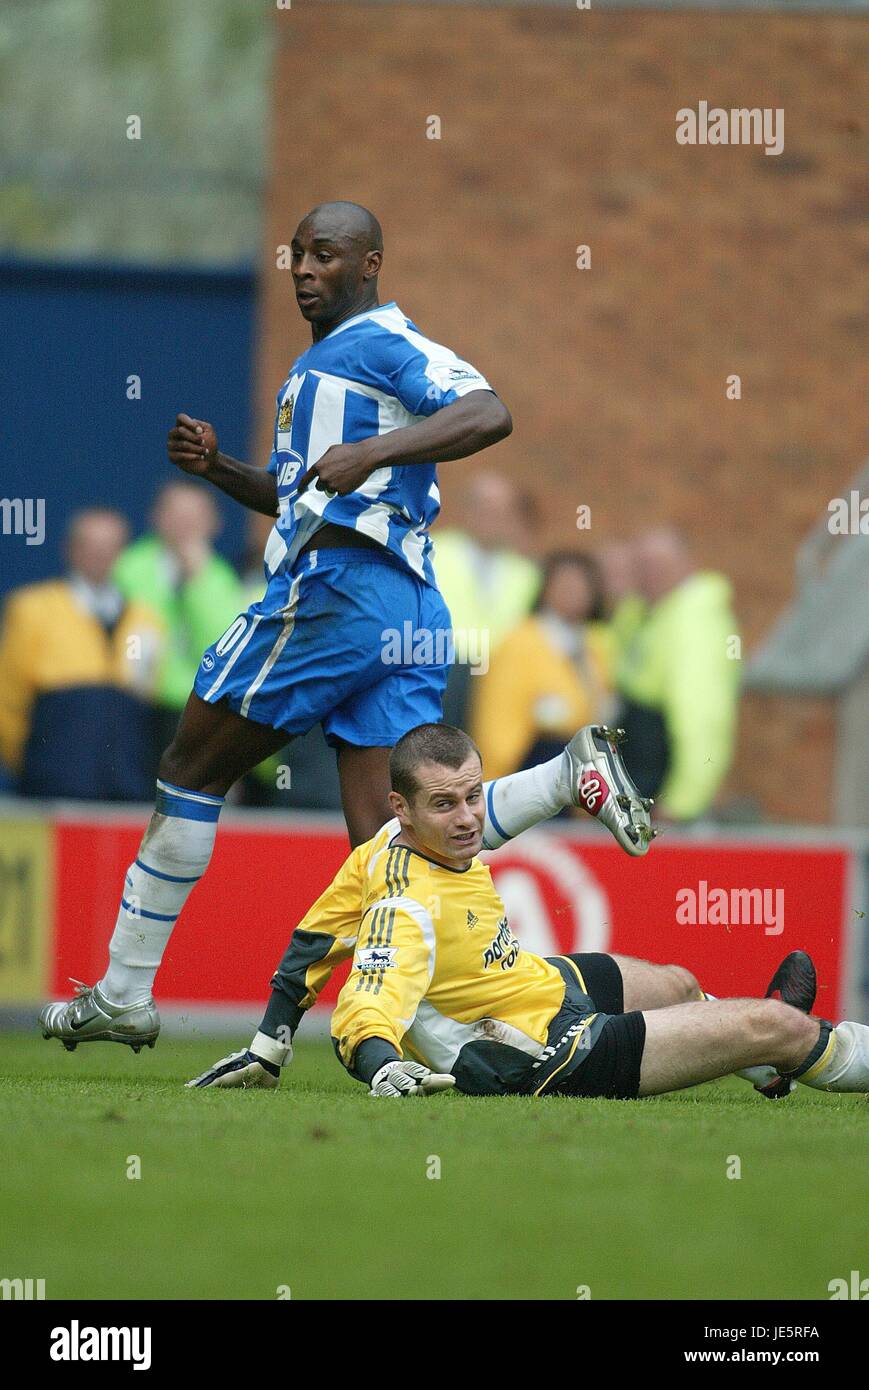 J ROBERTS & S GIVEN WIGAN ATHLETIC V NEWCASTLE UNI 15 October 2005 Stock Photo